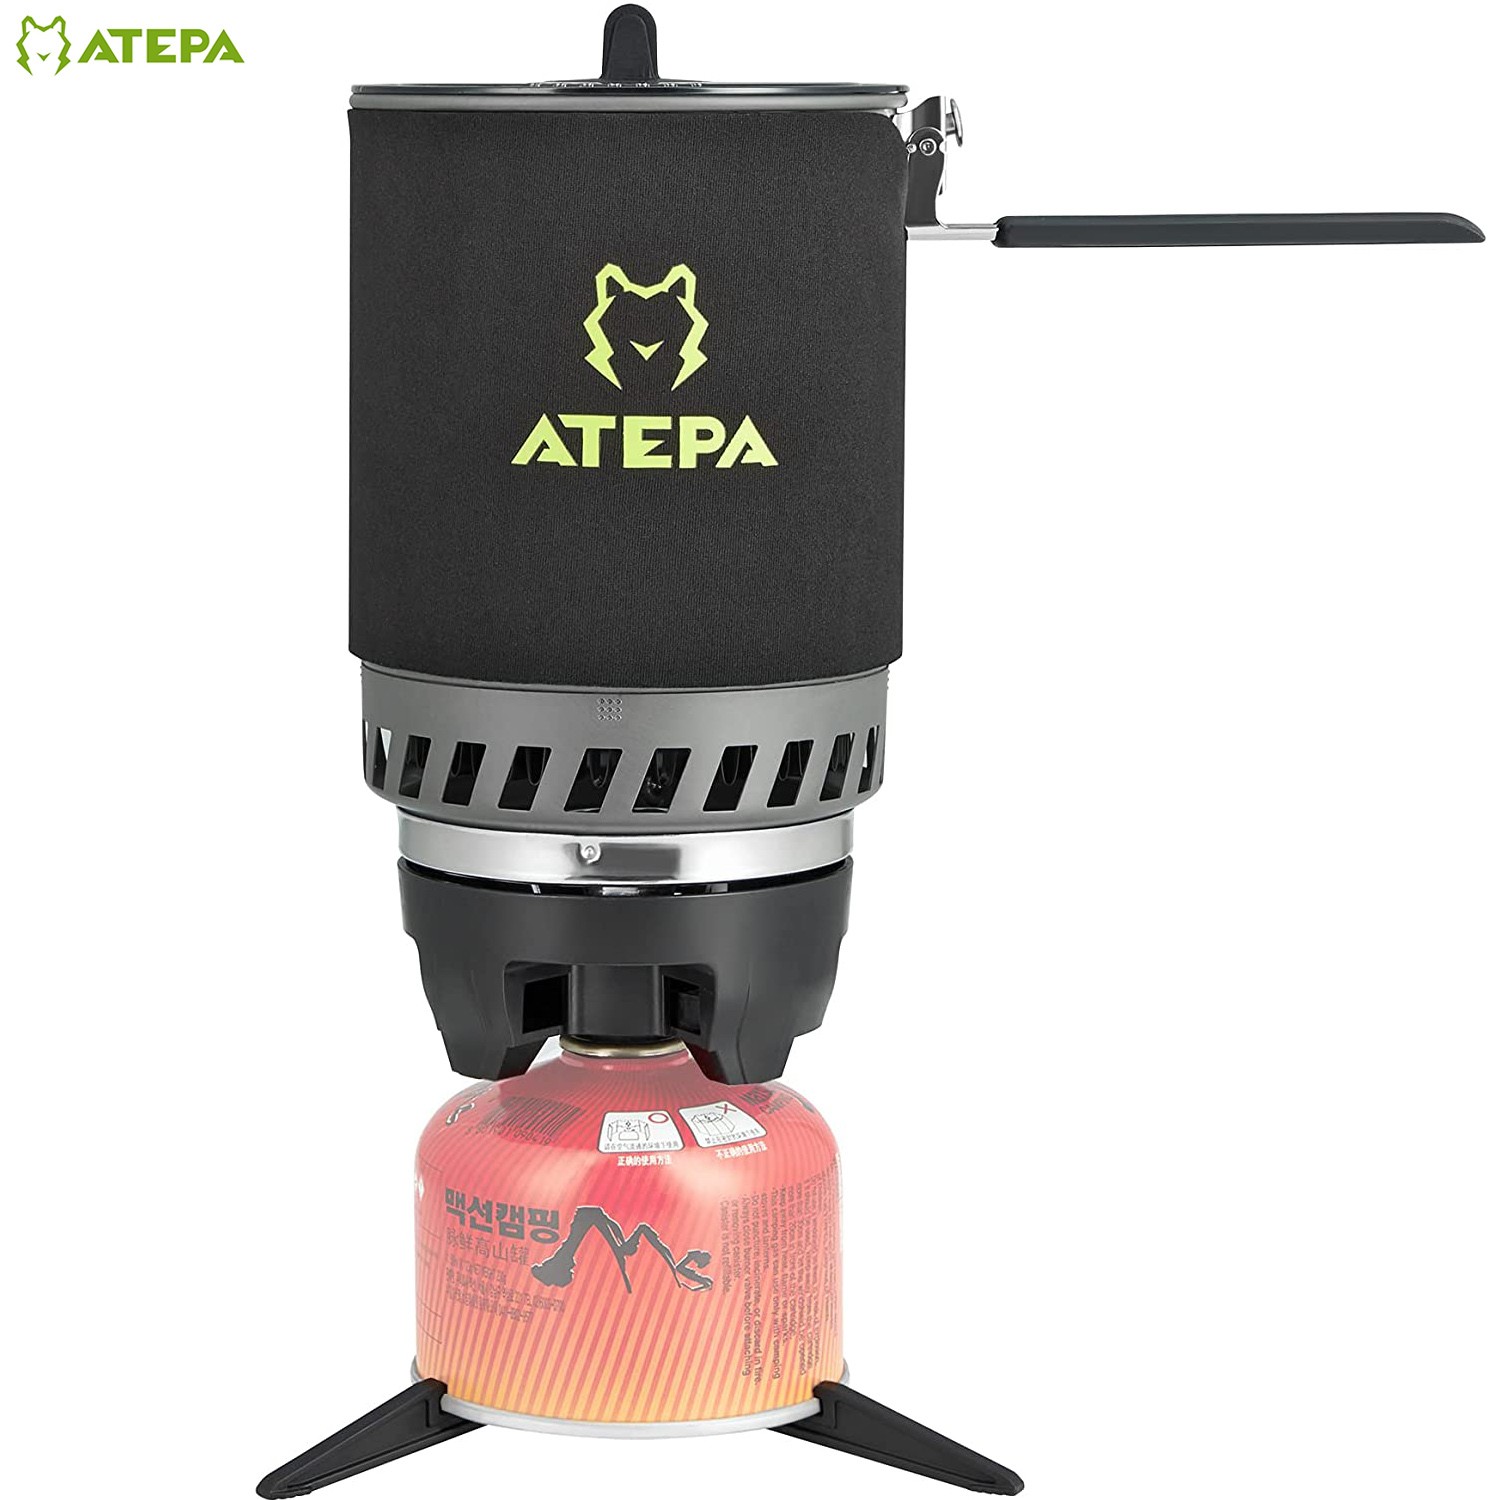 Atepa Portable  Lightweight Backpacking Camping Hiking Stove 1.8 Ltr.